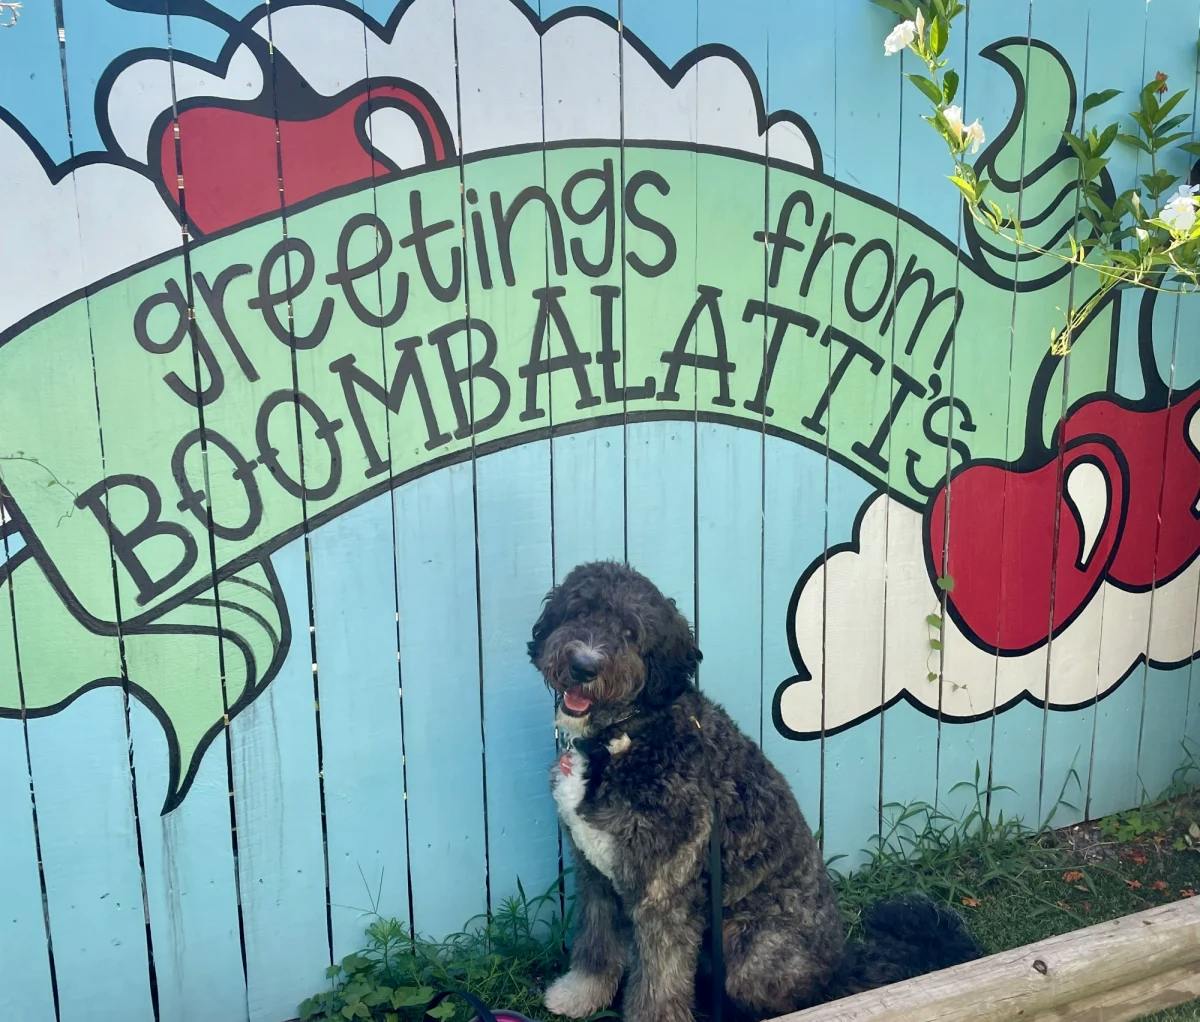 Dog posing in front of wall paint saying greetings from BOOMBALATTIS.